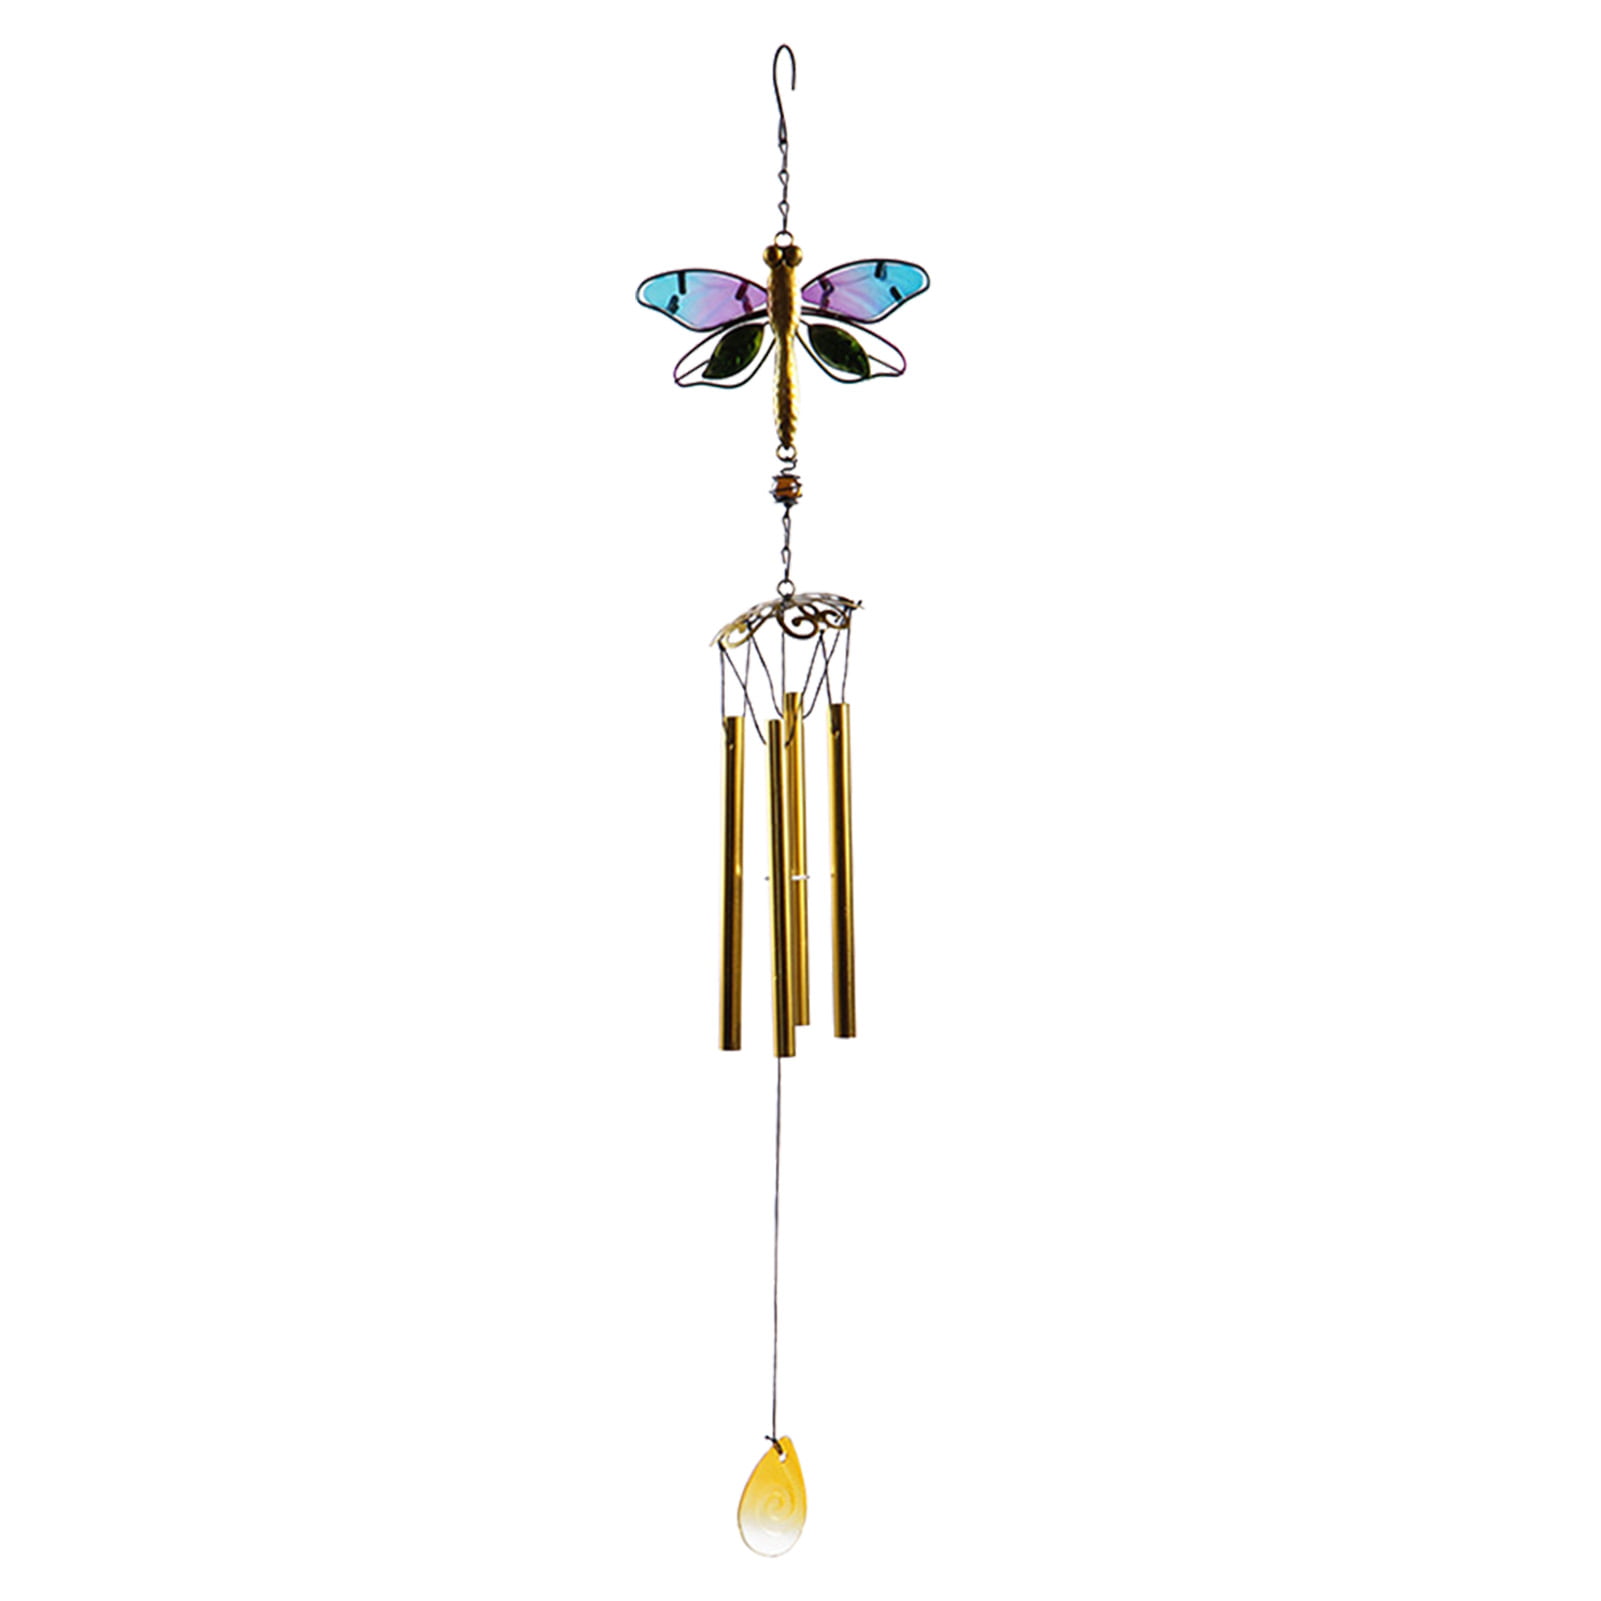 Garden Patio Home Decor Wind Chime Hummingbird Dragonfly Gift Mobile Art Craft 